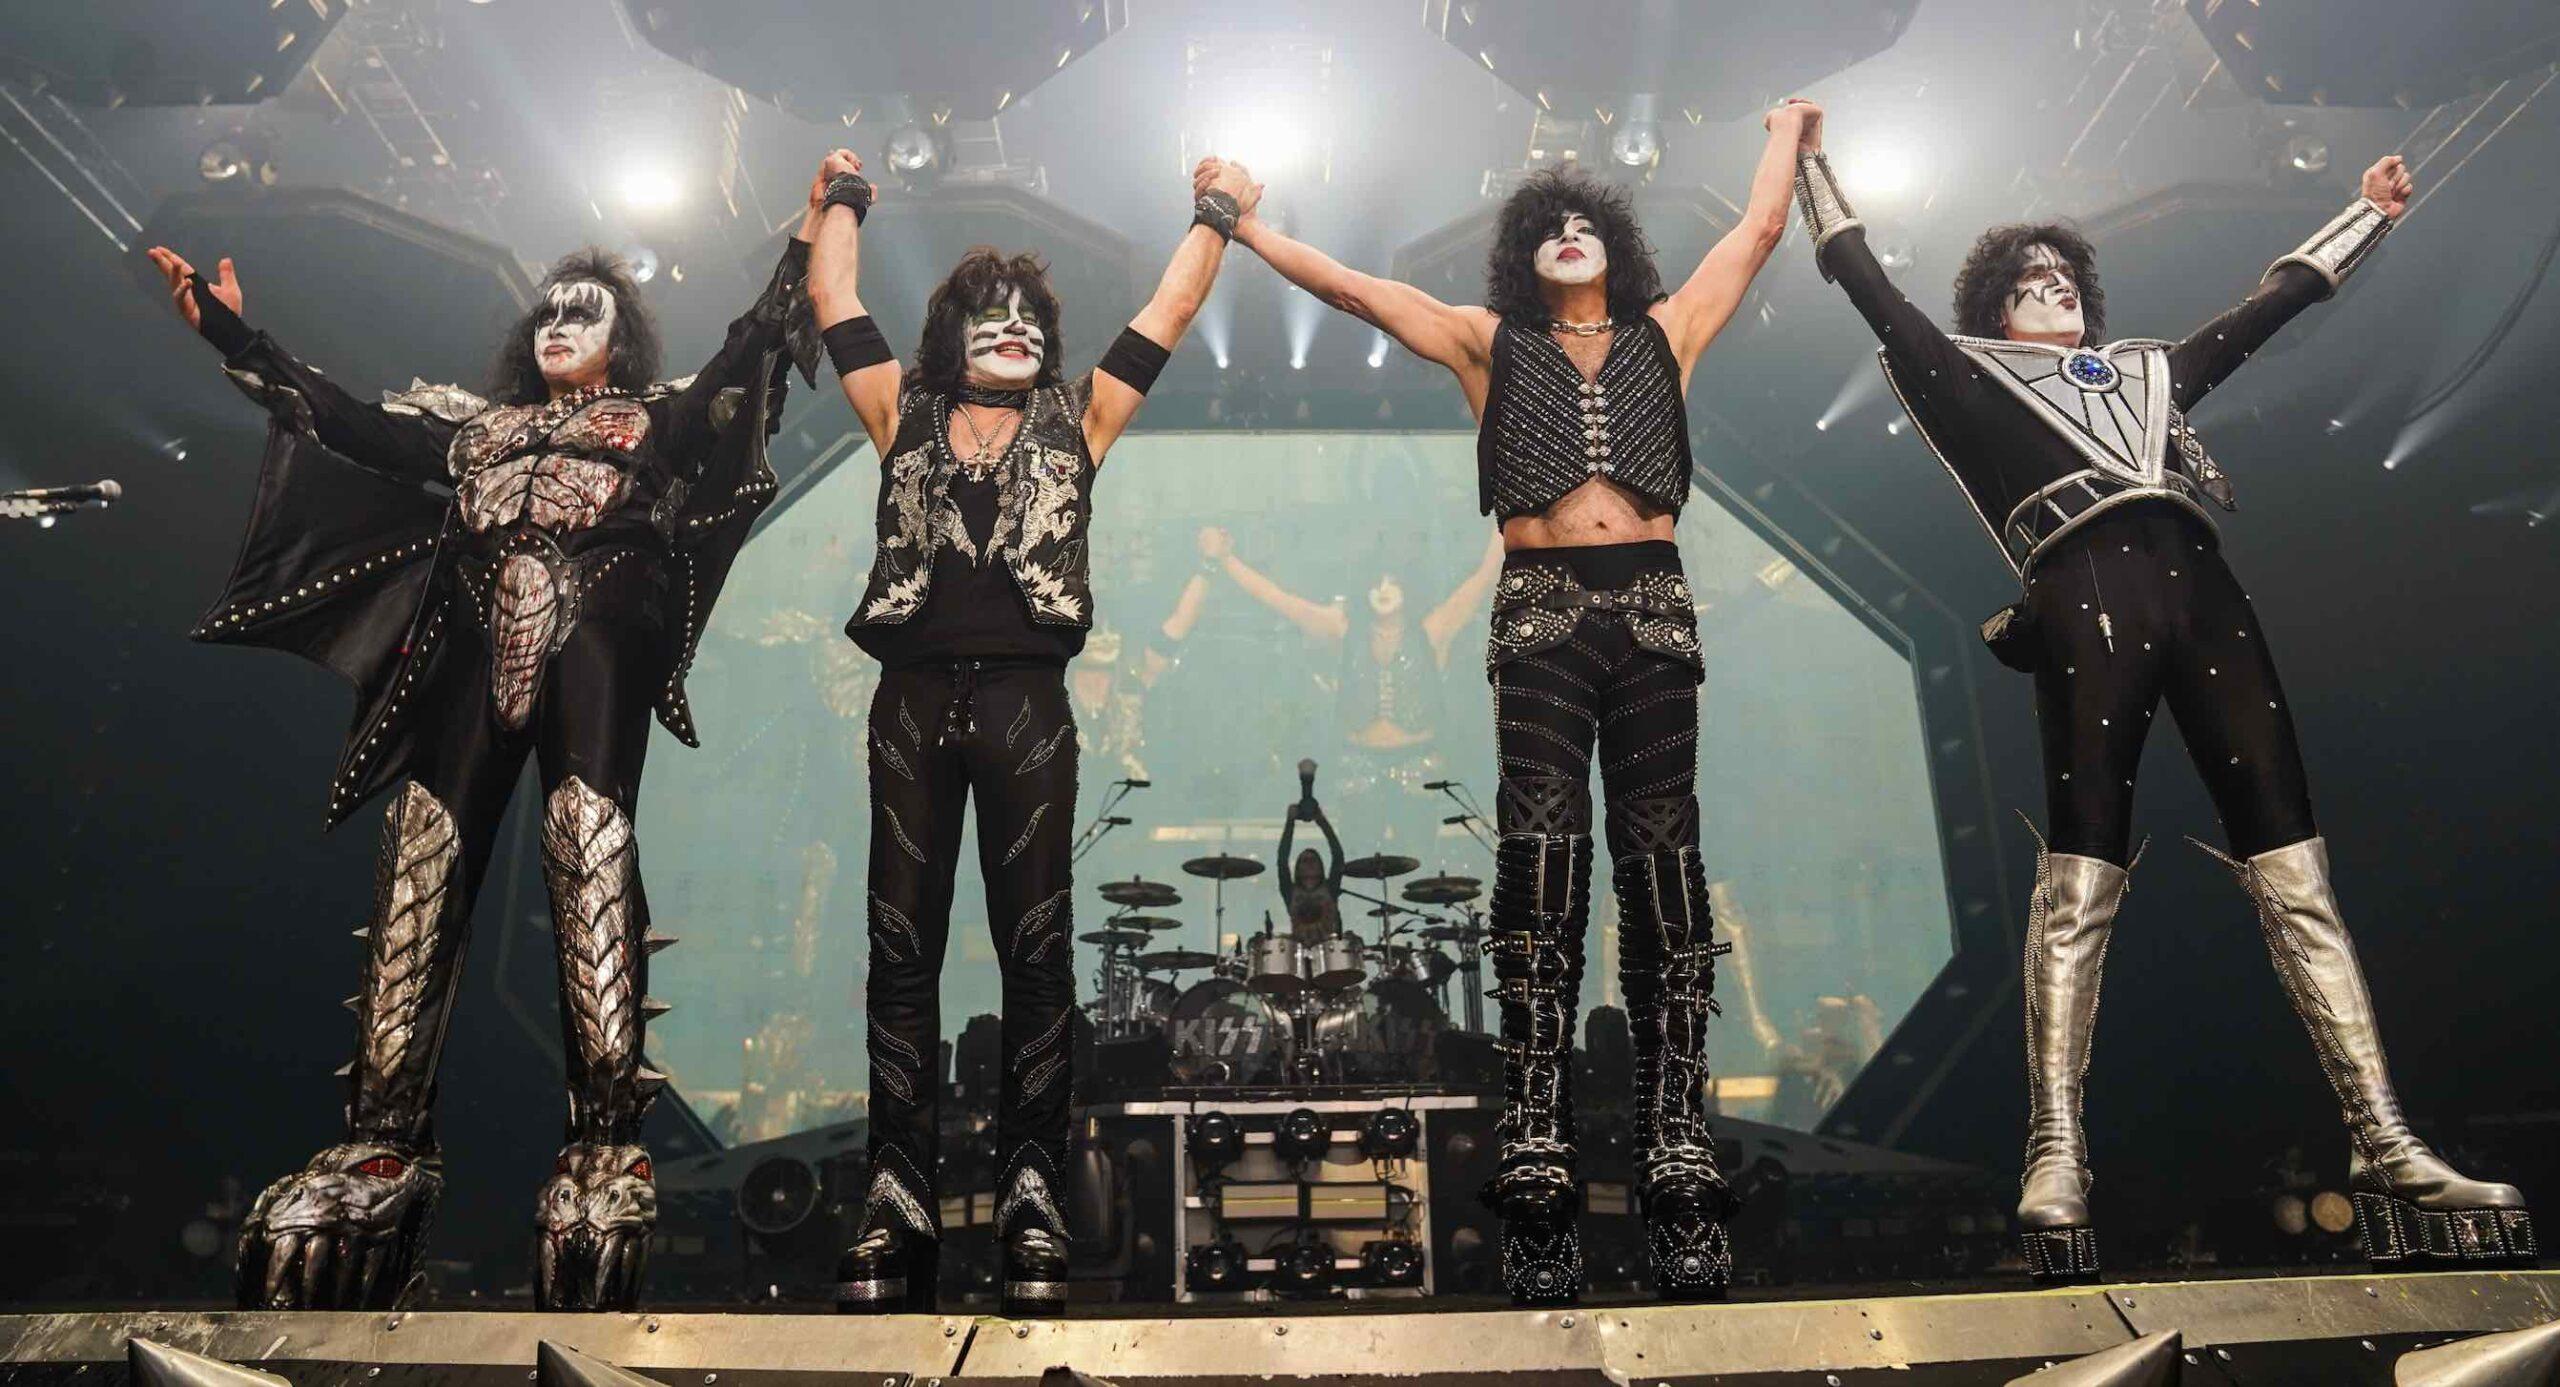 There's one last opportunity to catch KISS in concert